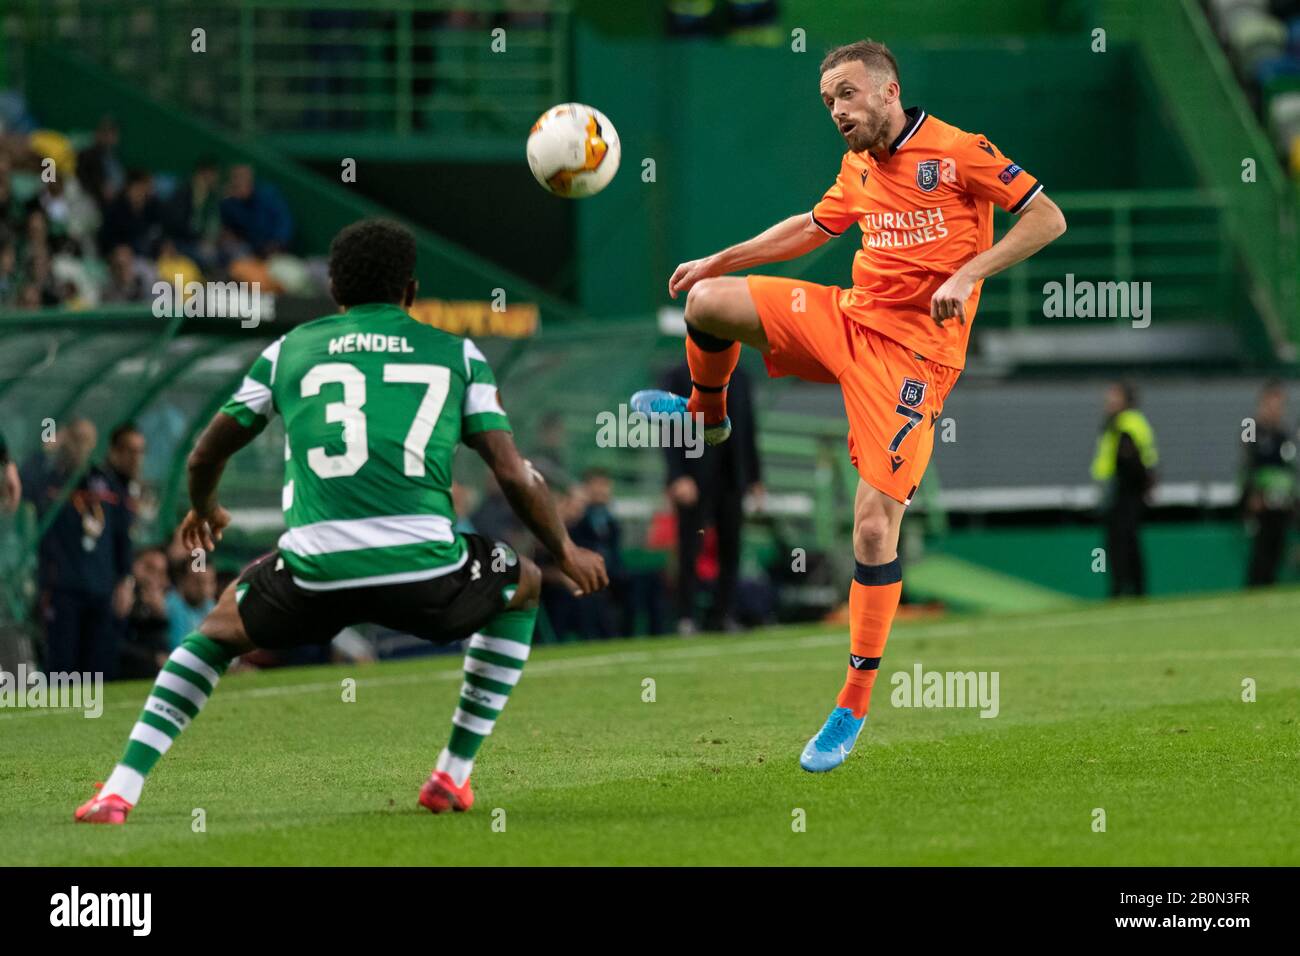 Istanbul Ba?ak?ehir FK player Edin Visca (R) and Sporting CP player Wendel (L) are seen in action during the UEFA Europa League Match 2019/20, Sporting CP vs Istanbul Ba?ak?ehir FK at José Alvalade Stadium.(Final Score: Sporting CP 3 -1 Istanbul Ba?ak?ehir FK) Stock Photo